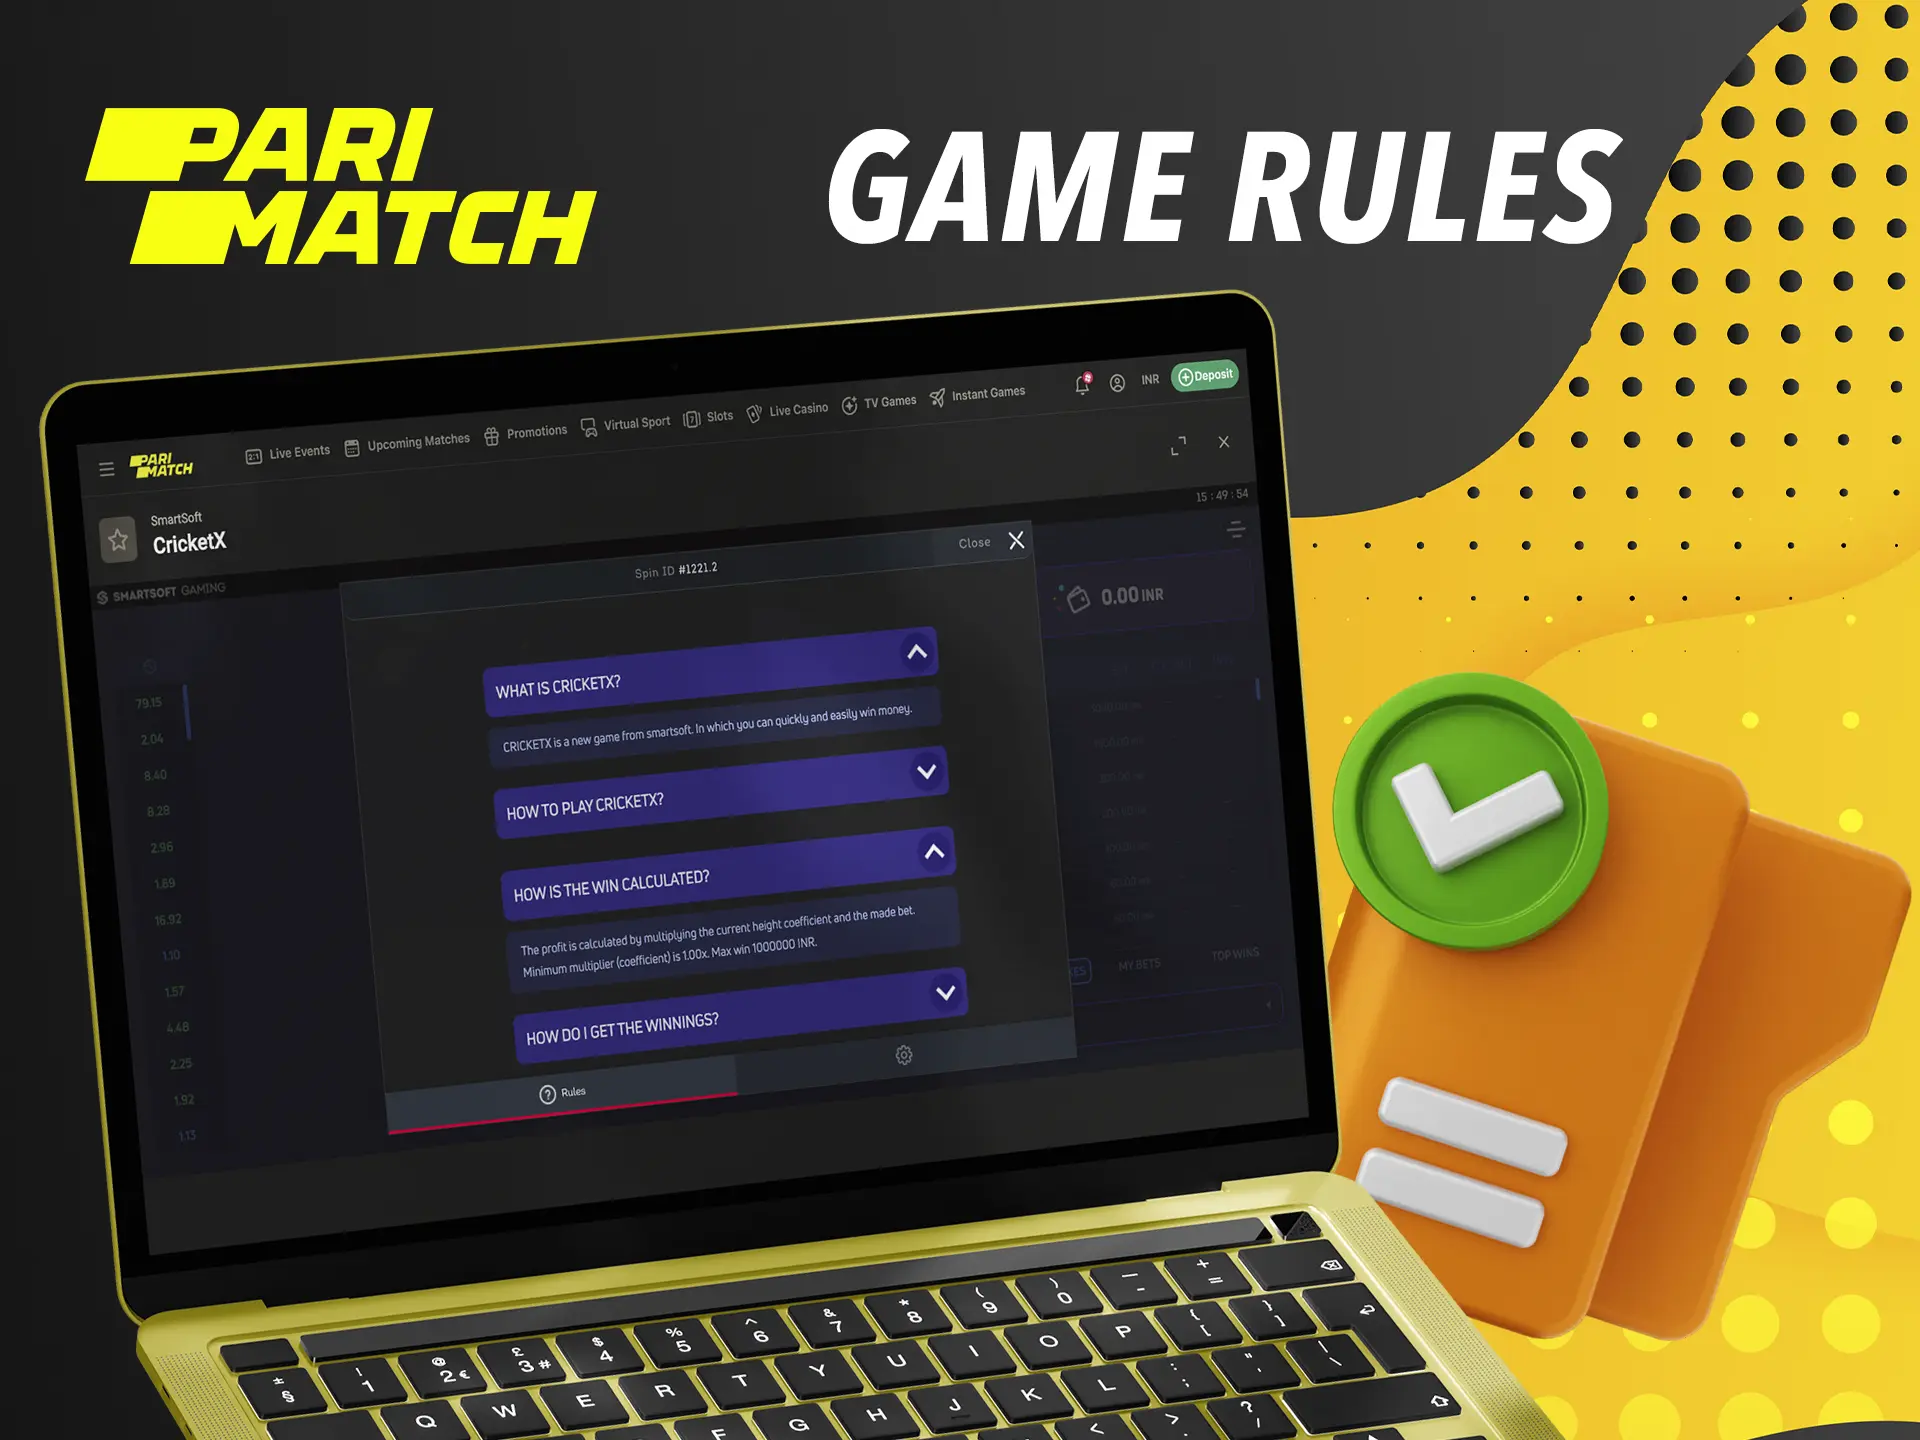 Before betting on Cricket X from Parimatch, familiarise yourself with the rules and features of the game to ensure success.